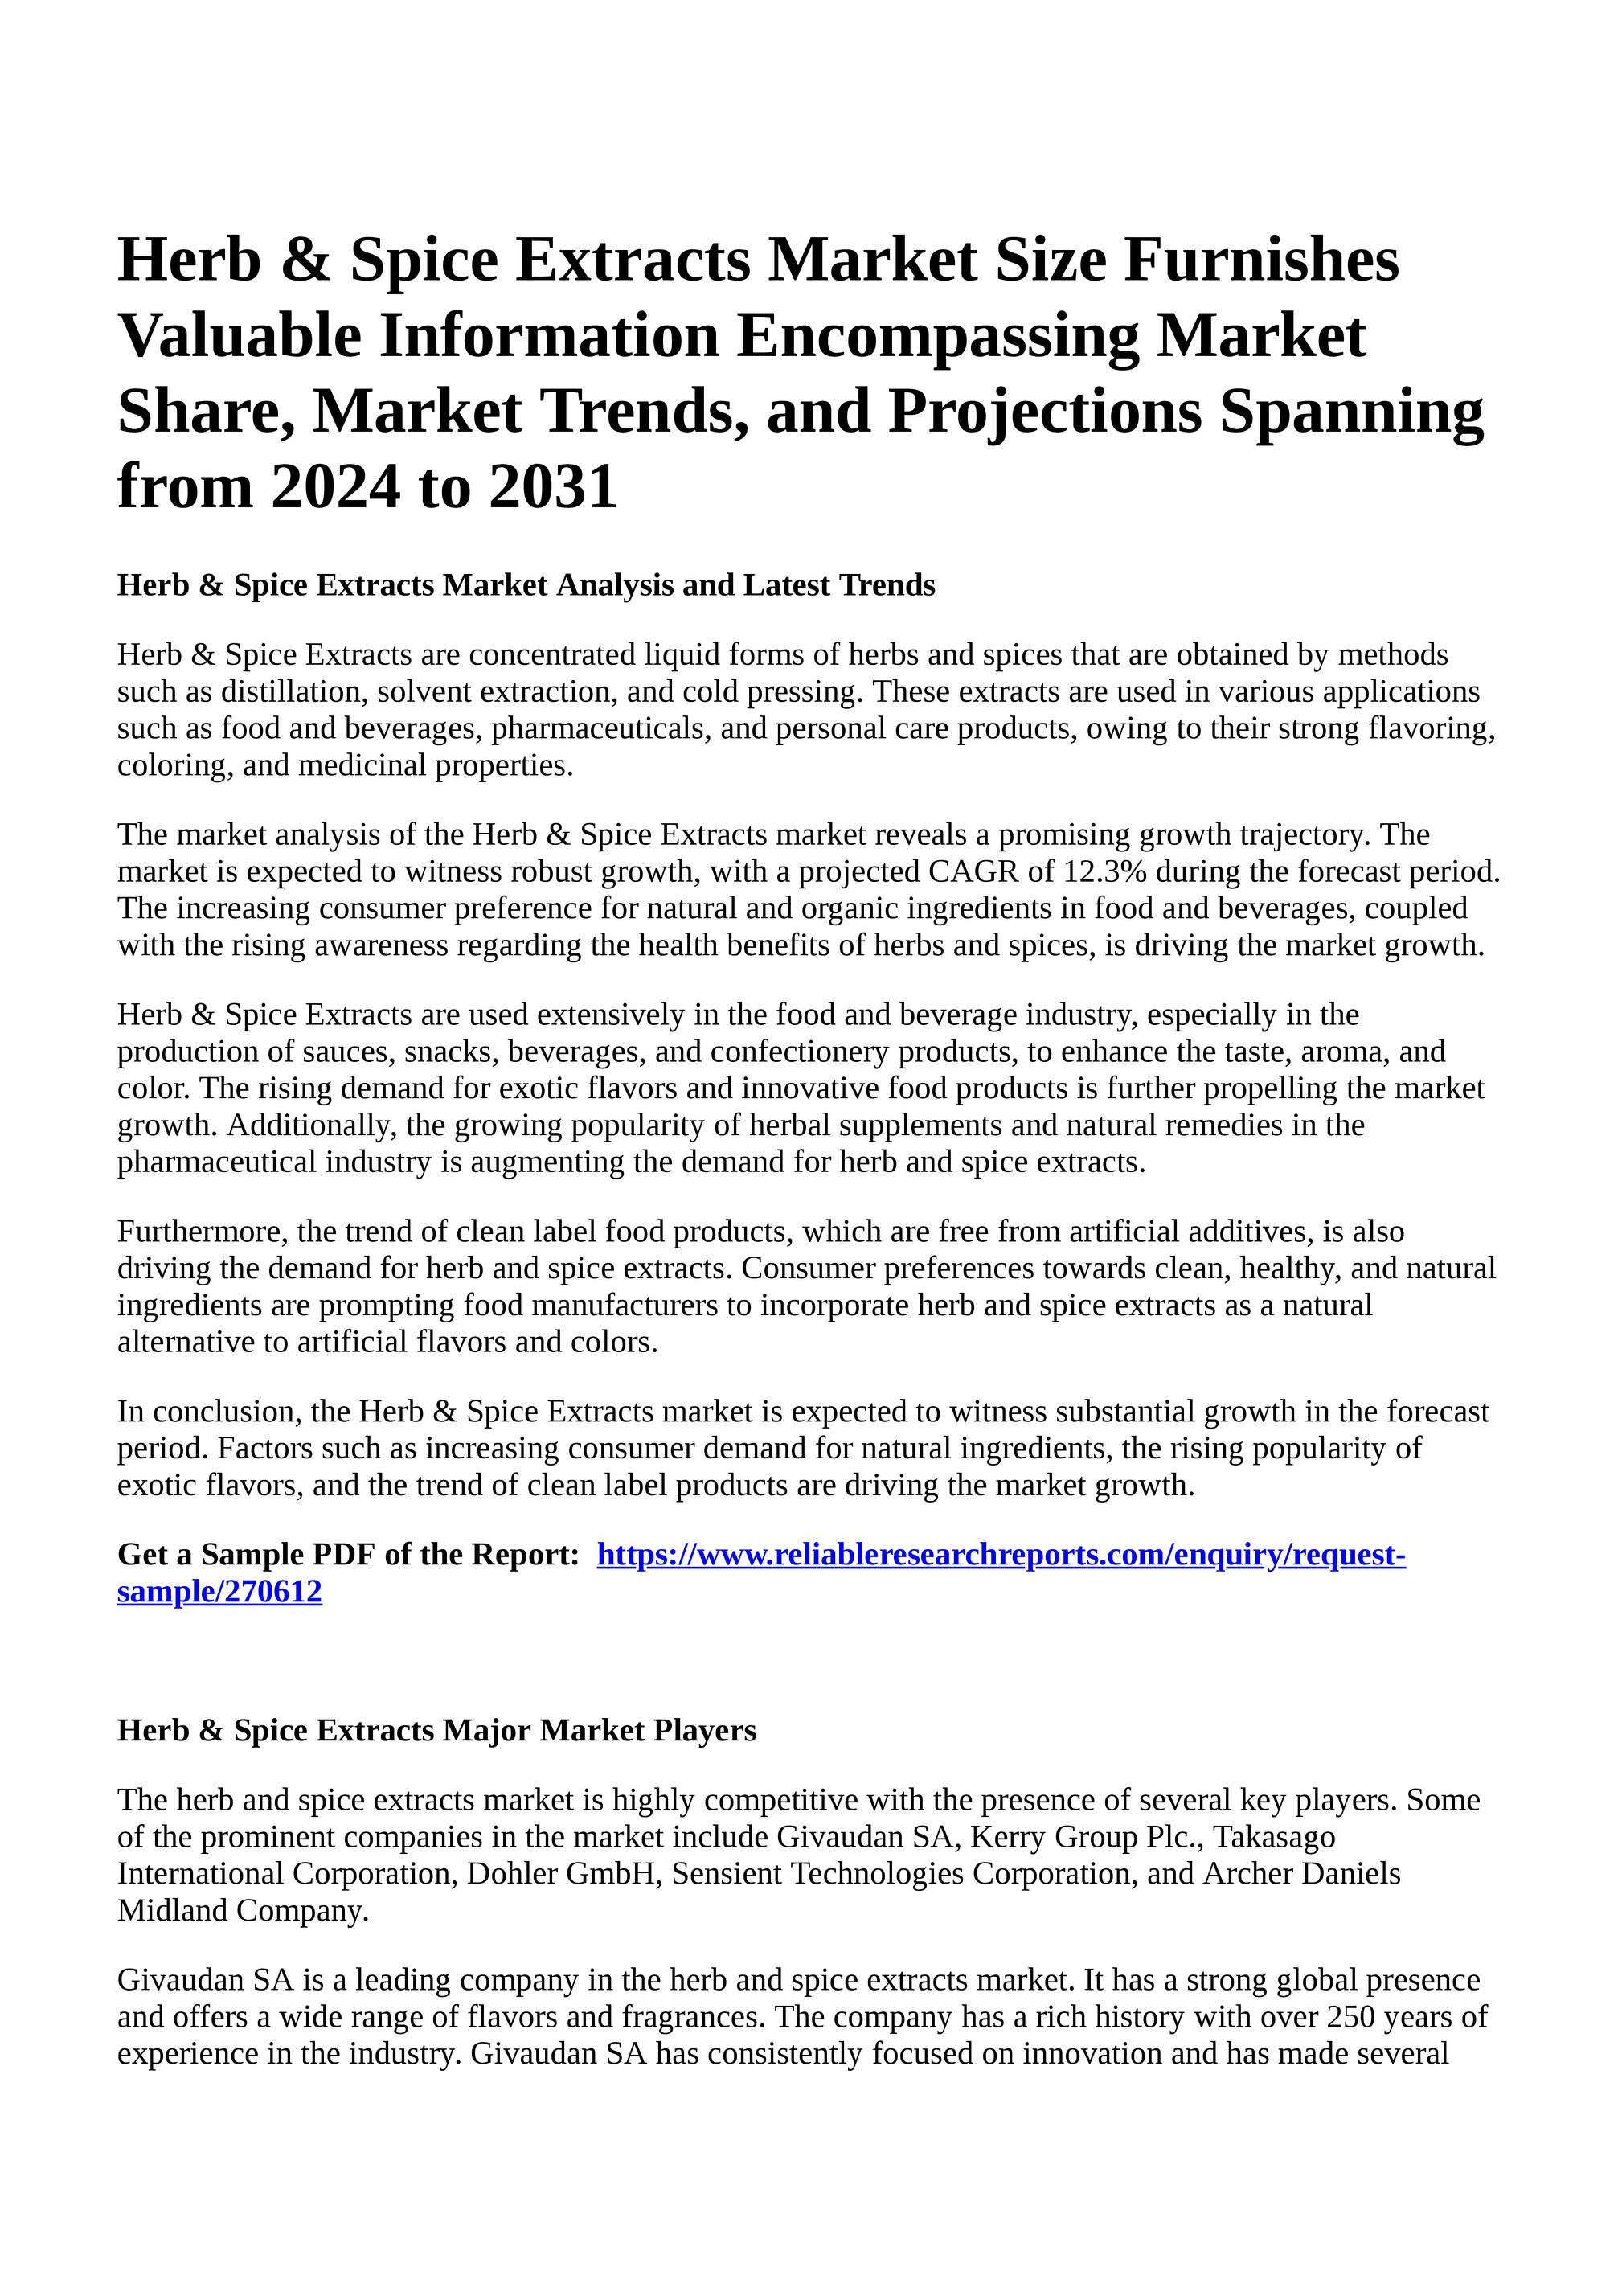 Spices and Seasonings Market Size, Share, Trends, Opportunities